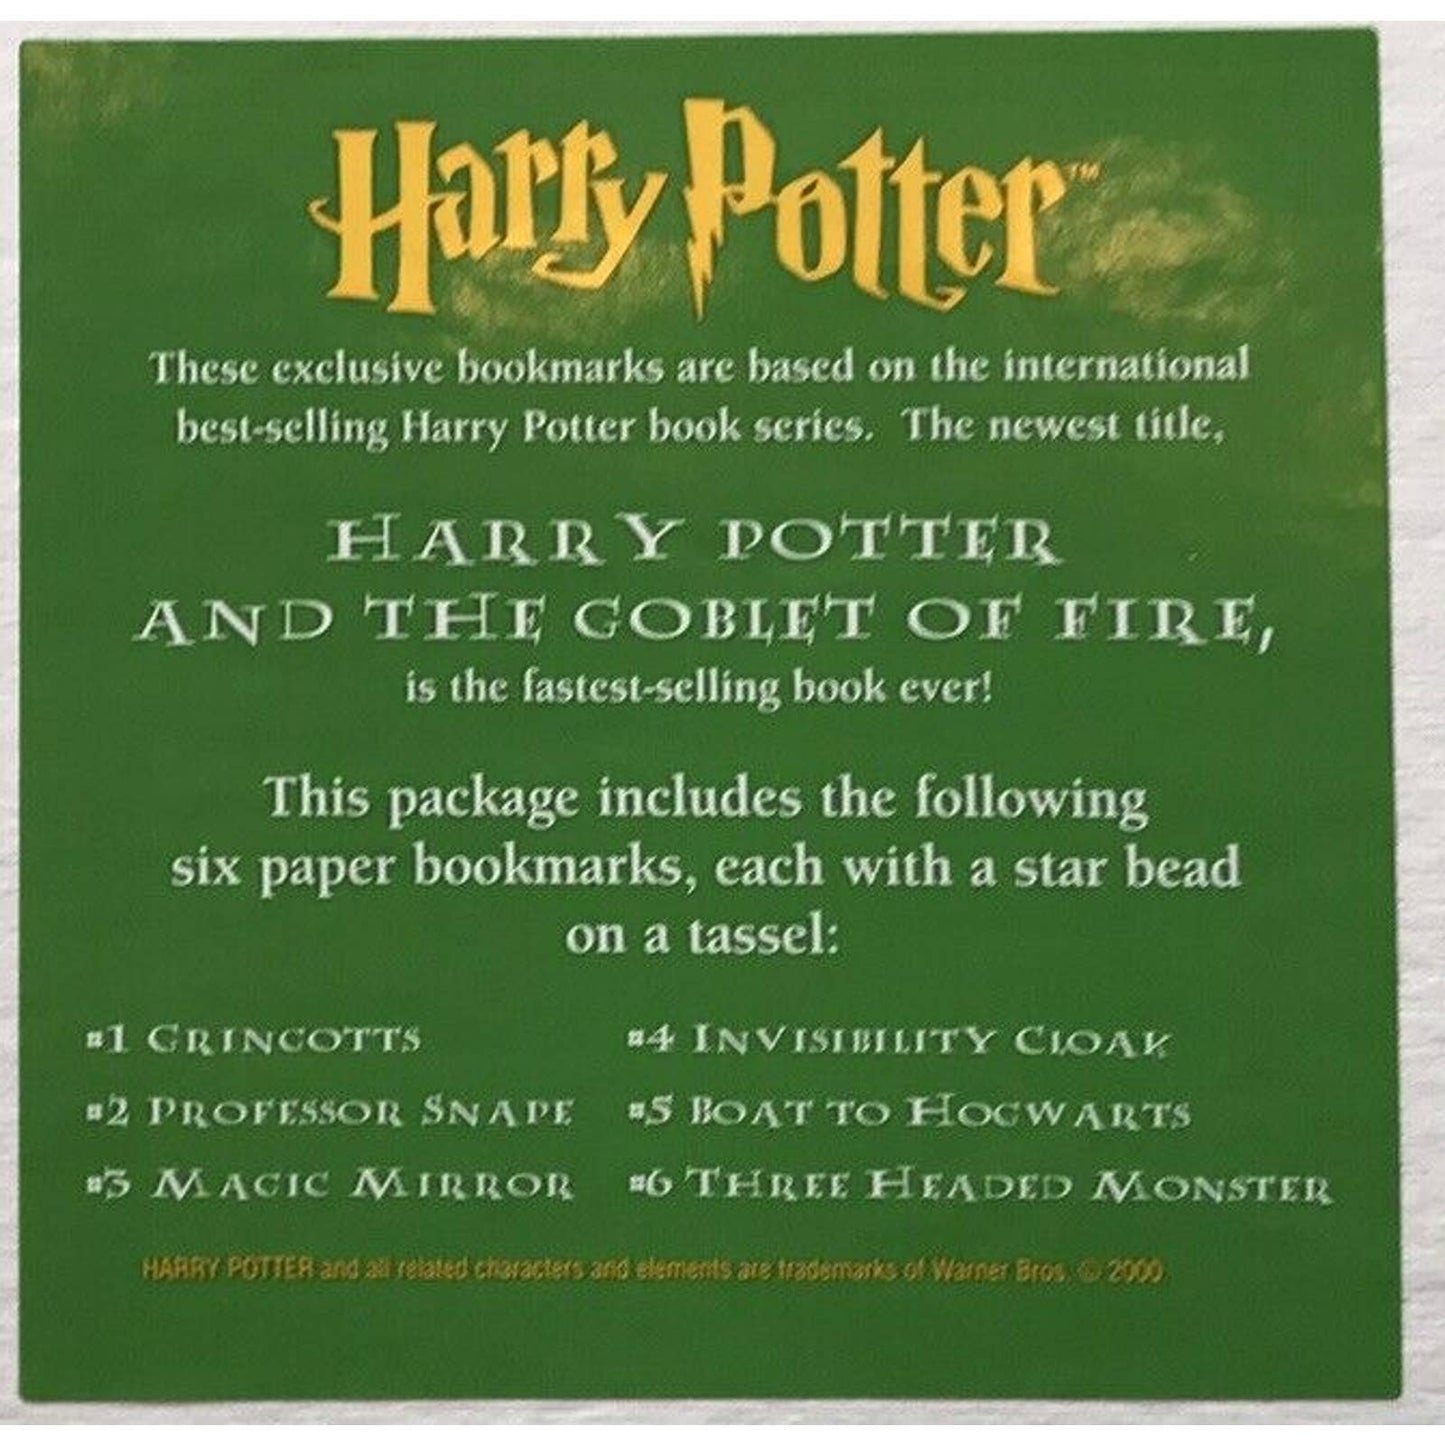 Harry Potter And The Sorcerer’s Stone *Invisibility Cloak* Scholastic Bookmark